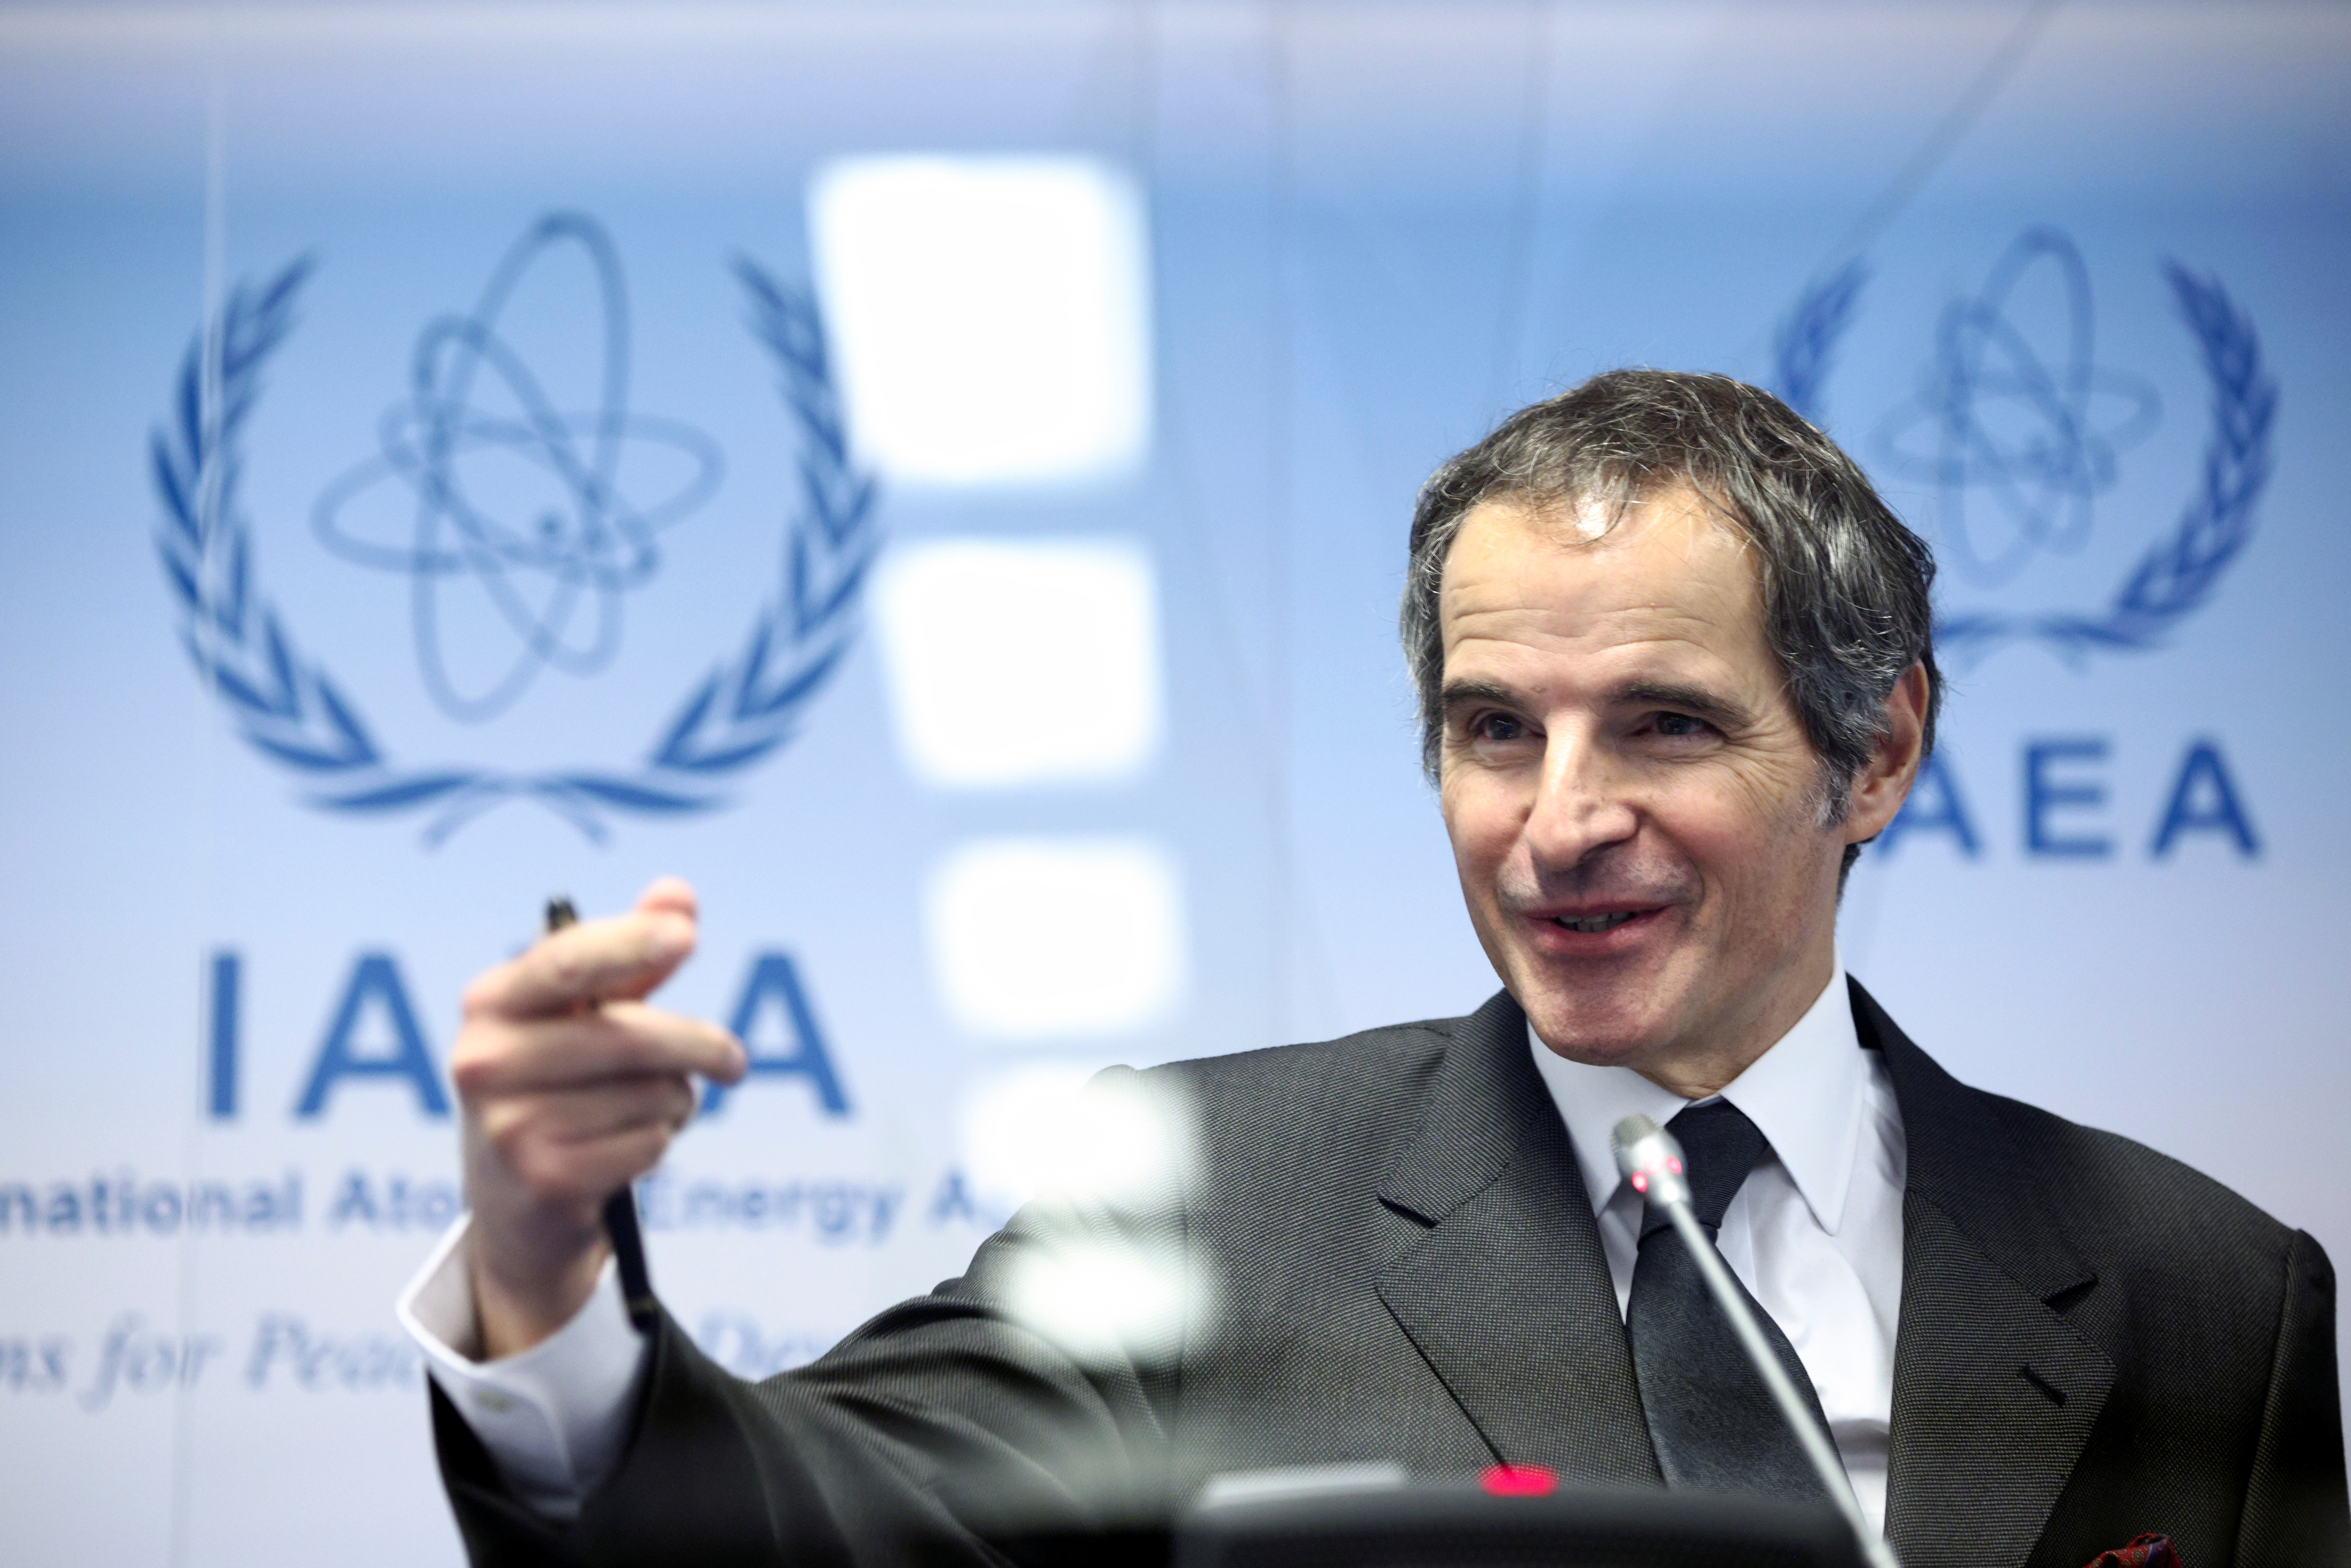 IAEA Director General Grossi holds news conference in Vienna